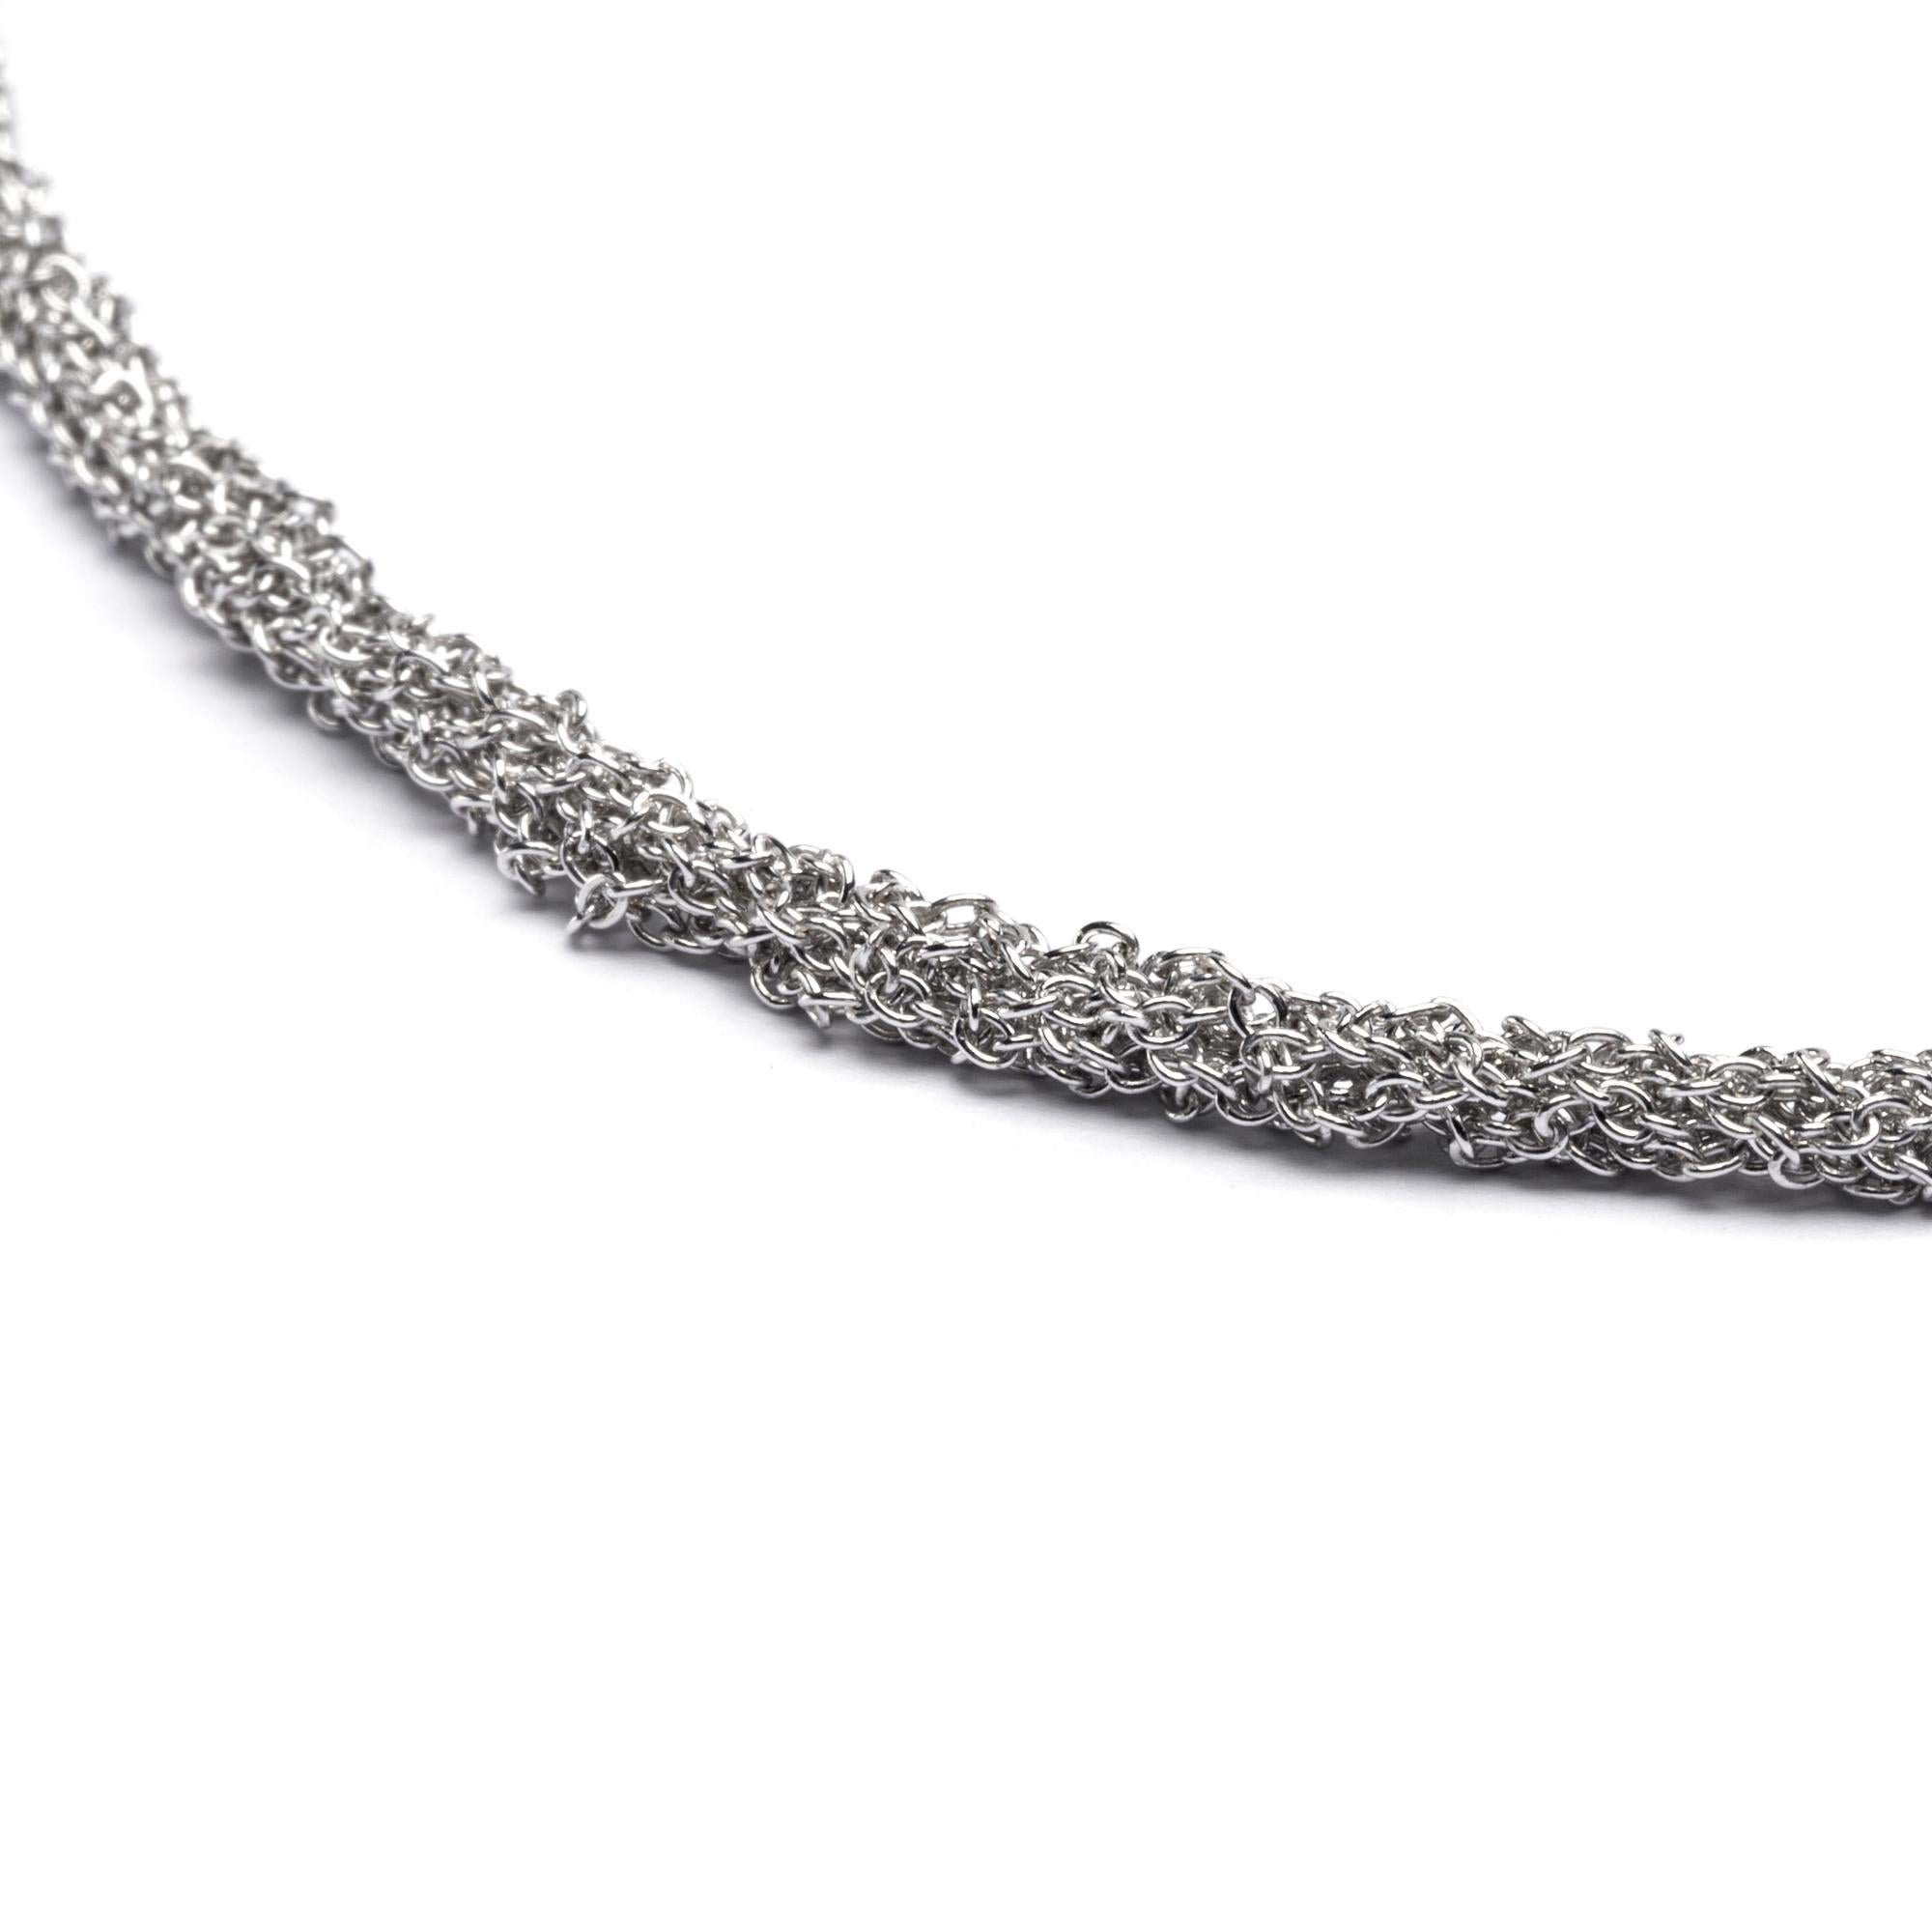 Alex Jona Rodhium Plated Sterling Silver Woven Long Chain Necklace For Sale 2